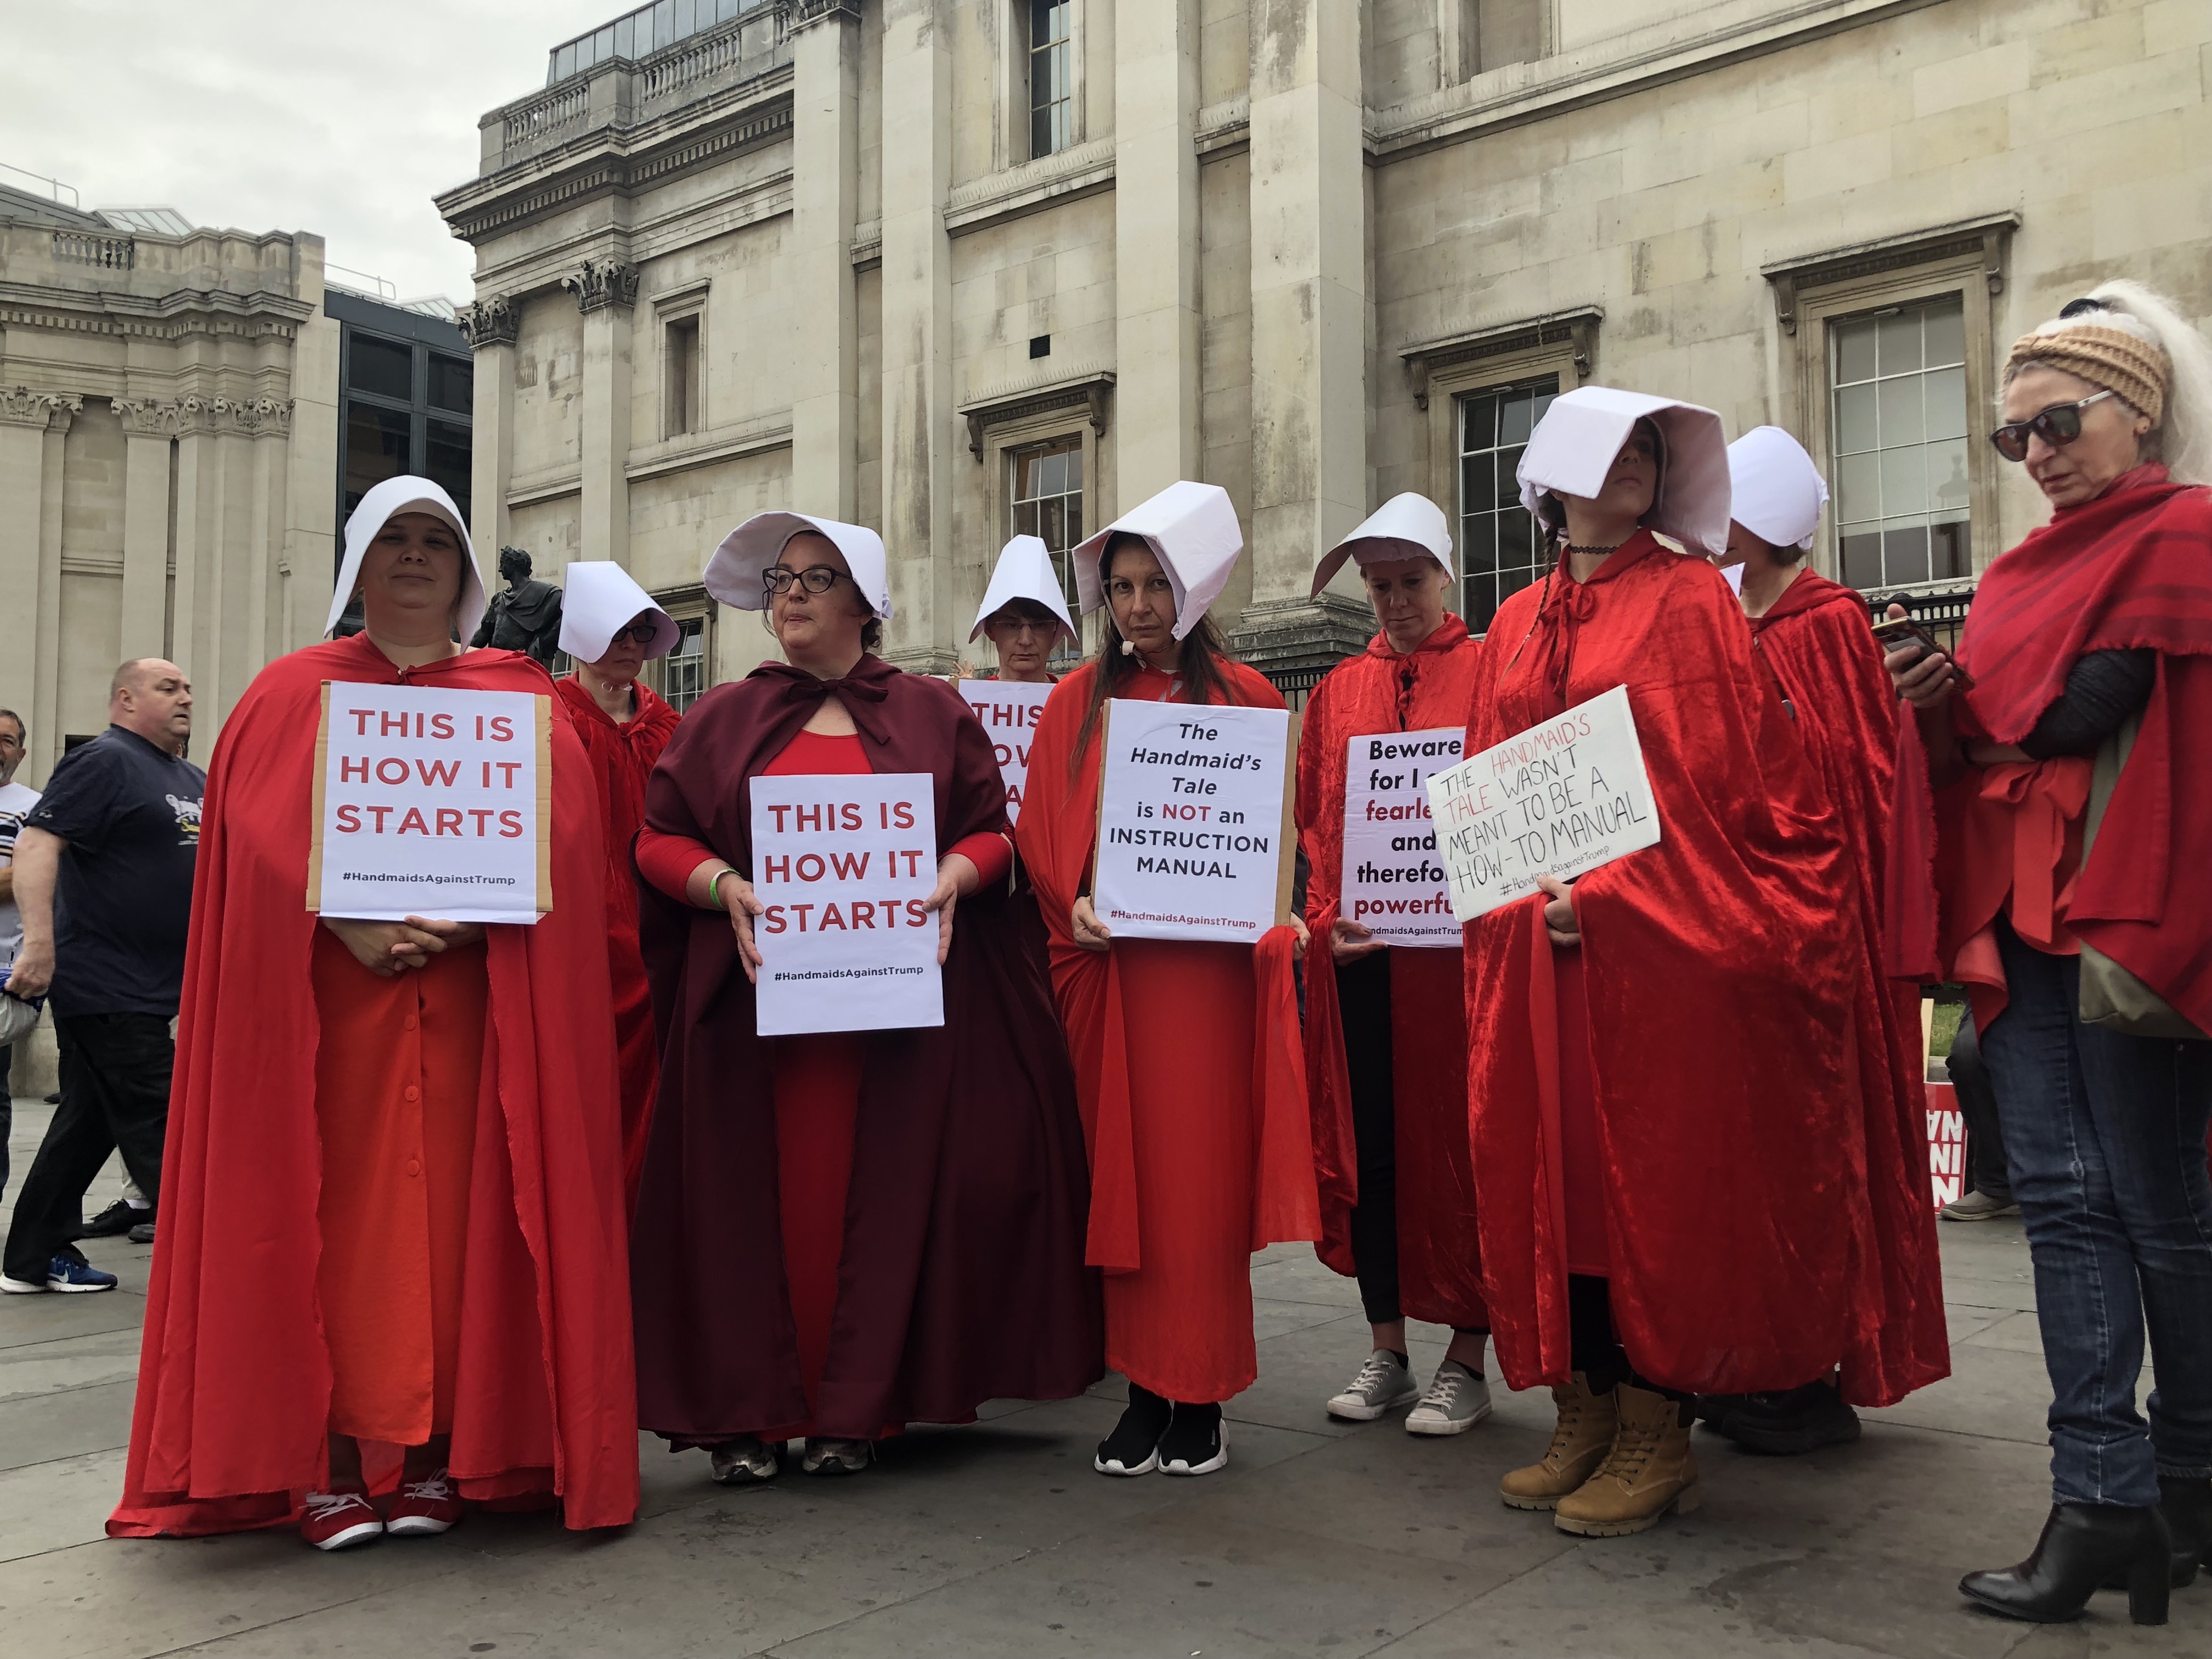 Handmaids Against Trump protest against the rollback in reproductive rights under U.S. President Trump at the anti-Trump demonstration in central London on Tuesday 4 June 2019. (Madeline Roache)